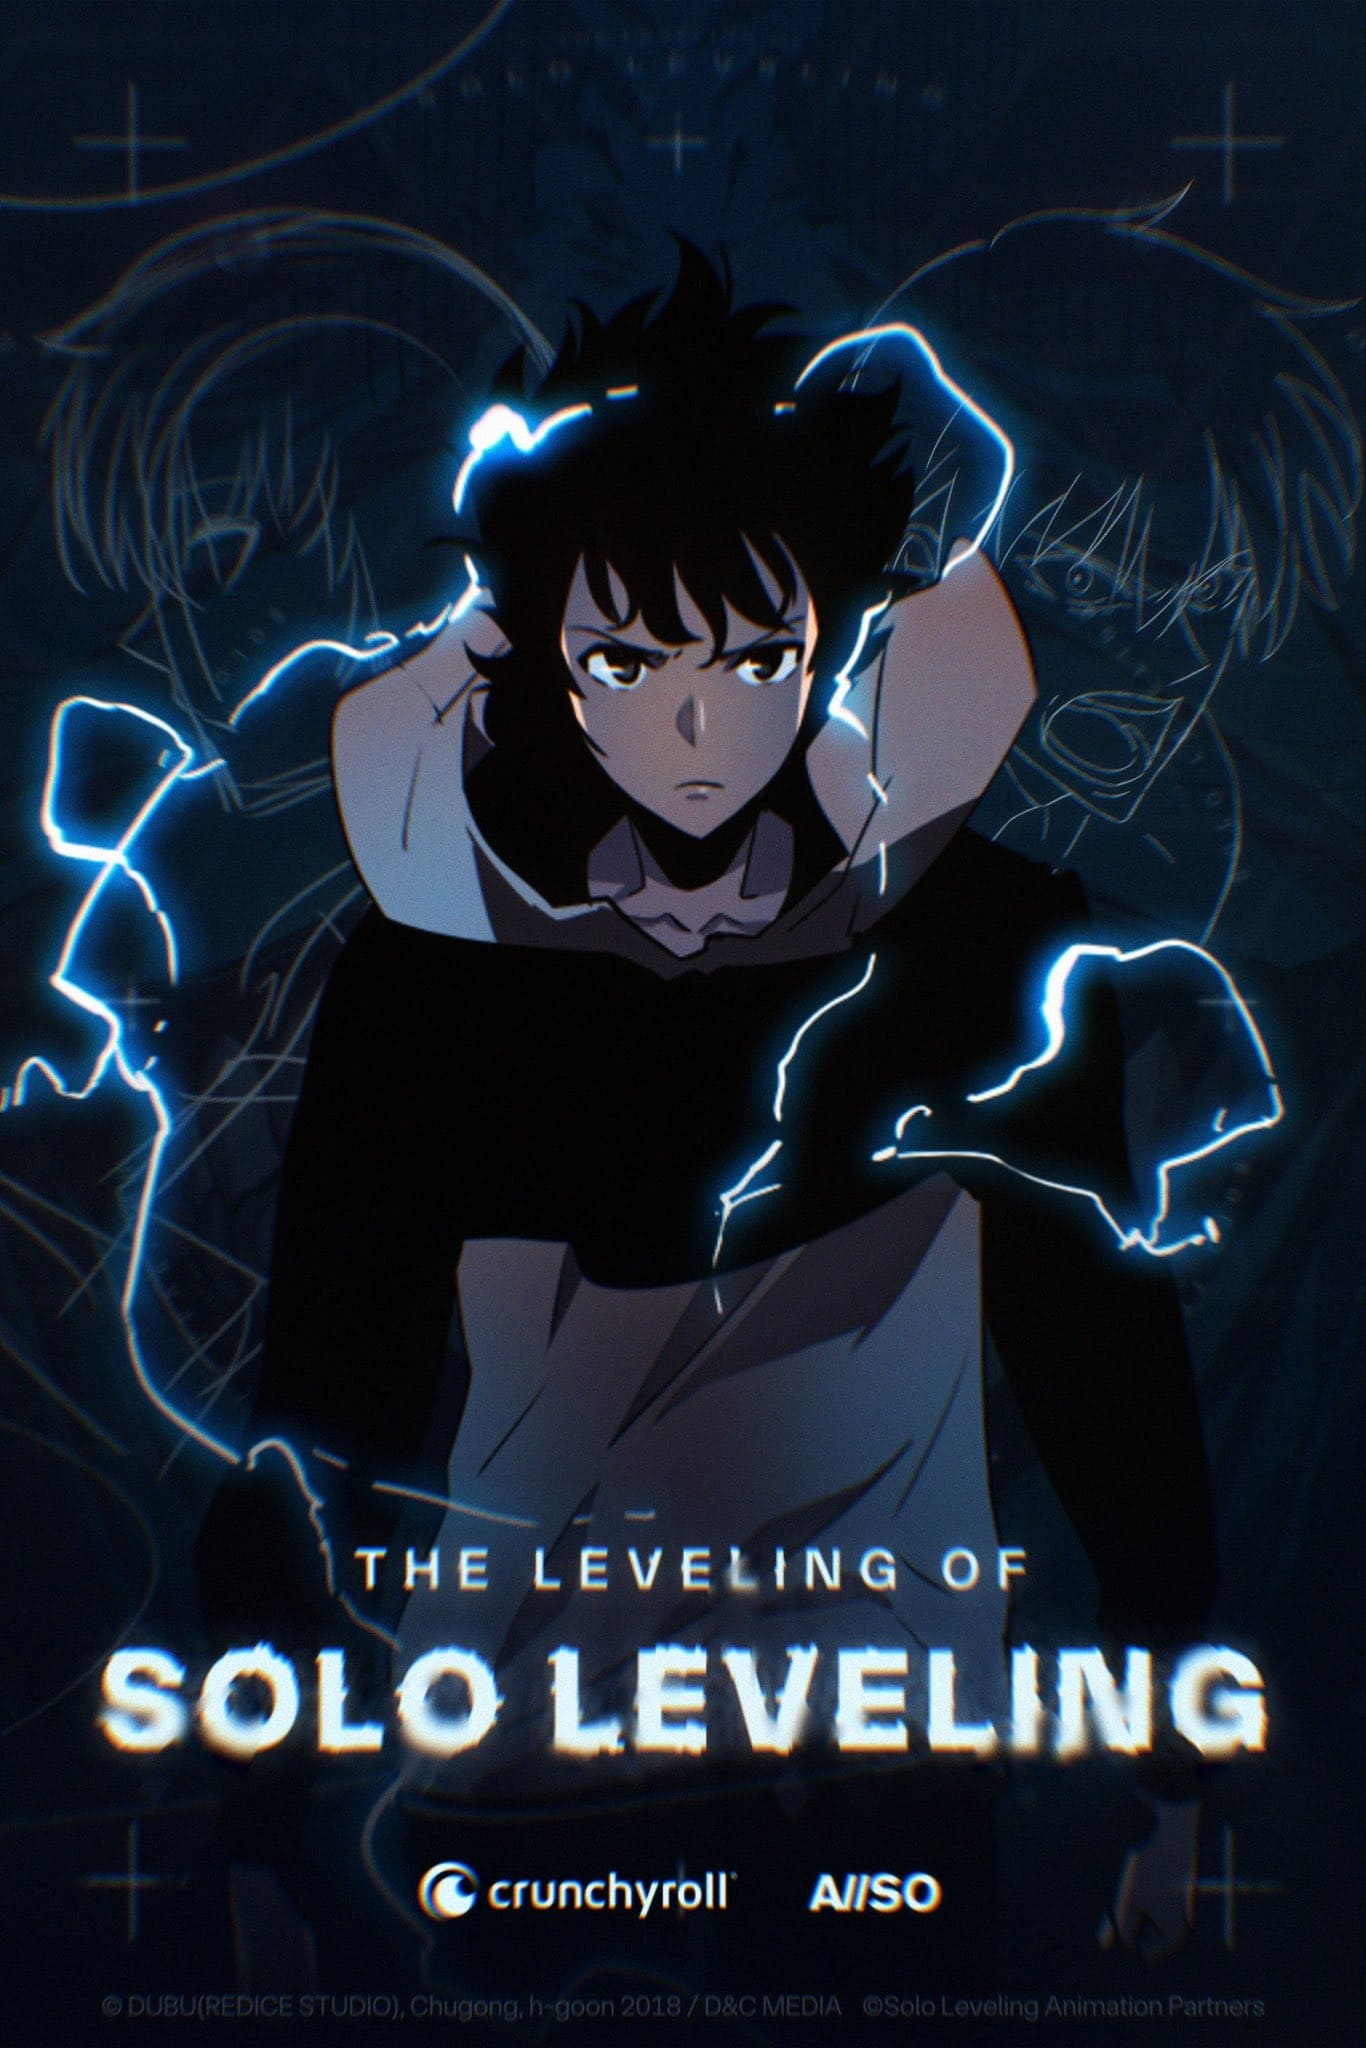 THE LEVELING OF SOLO LEVELING